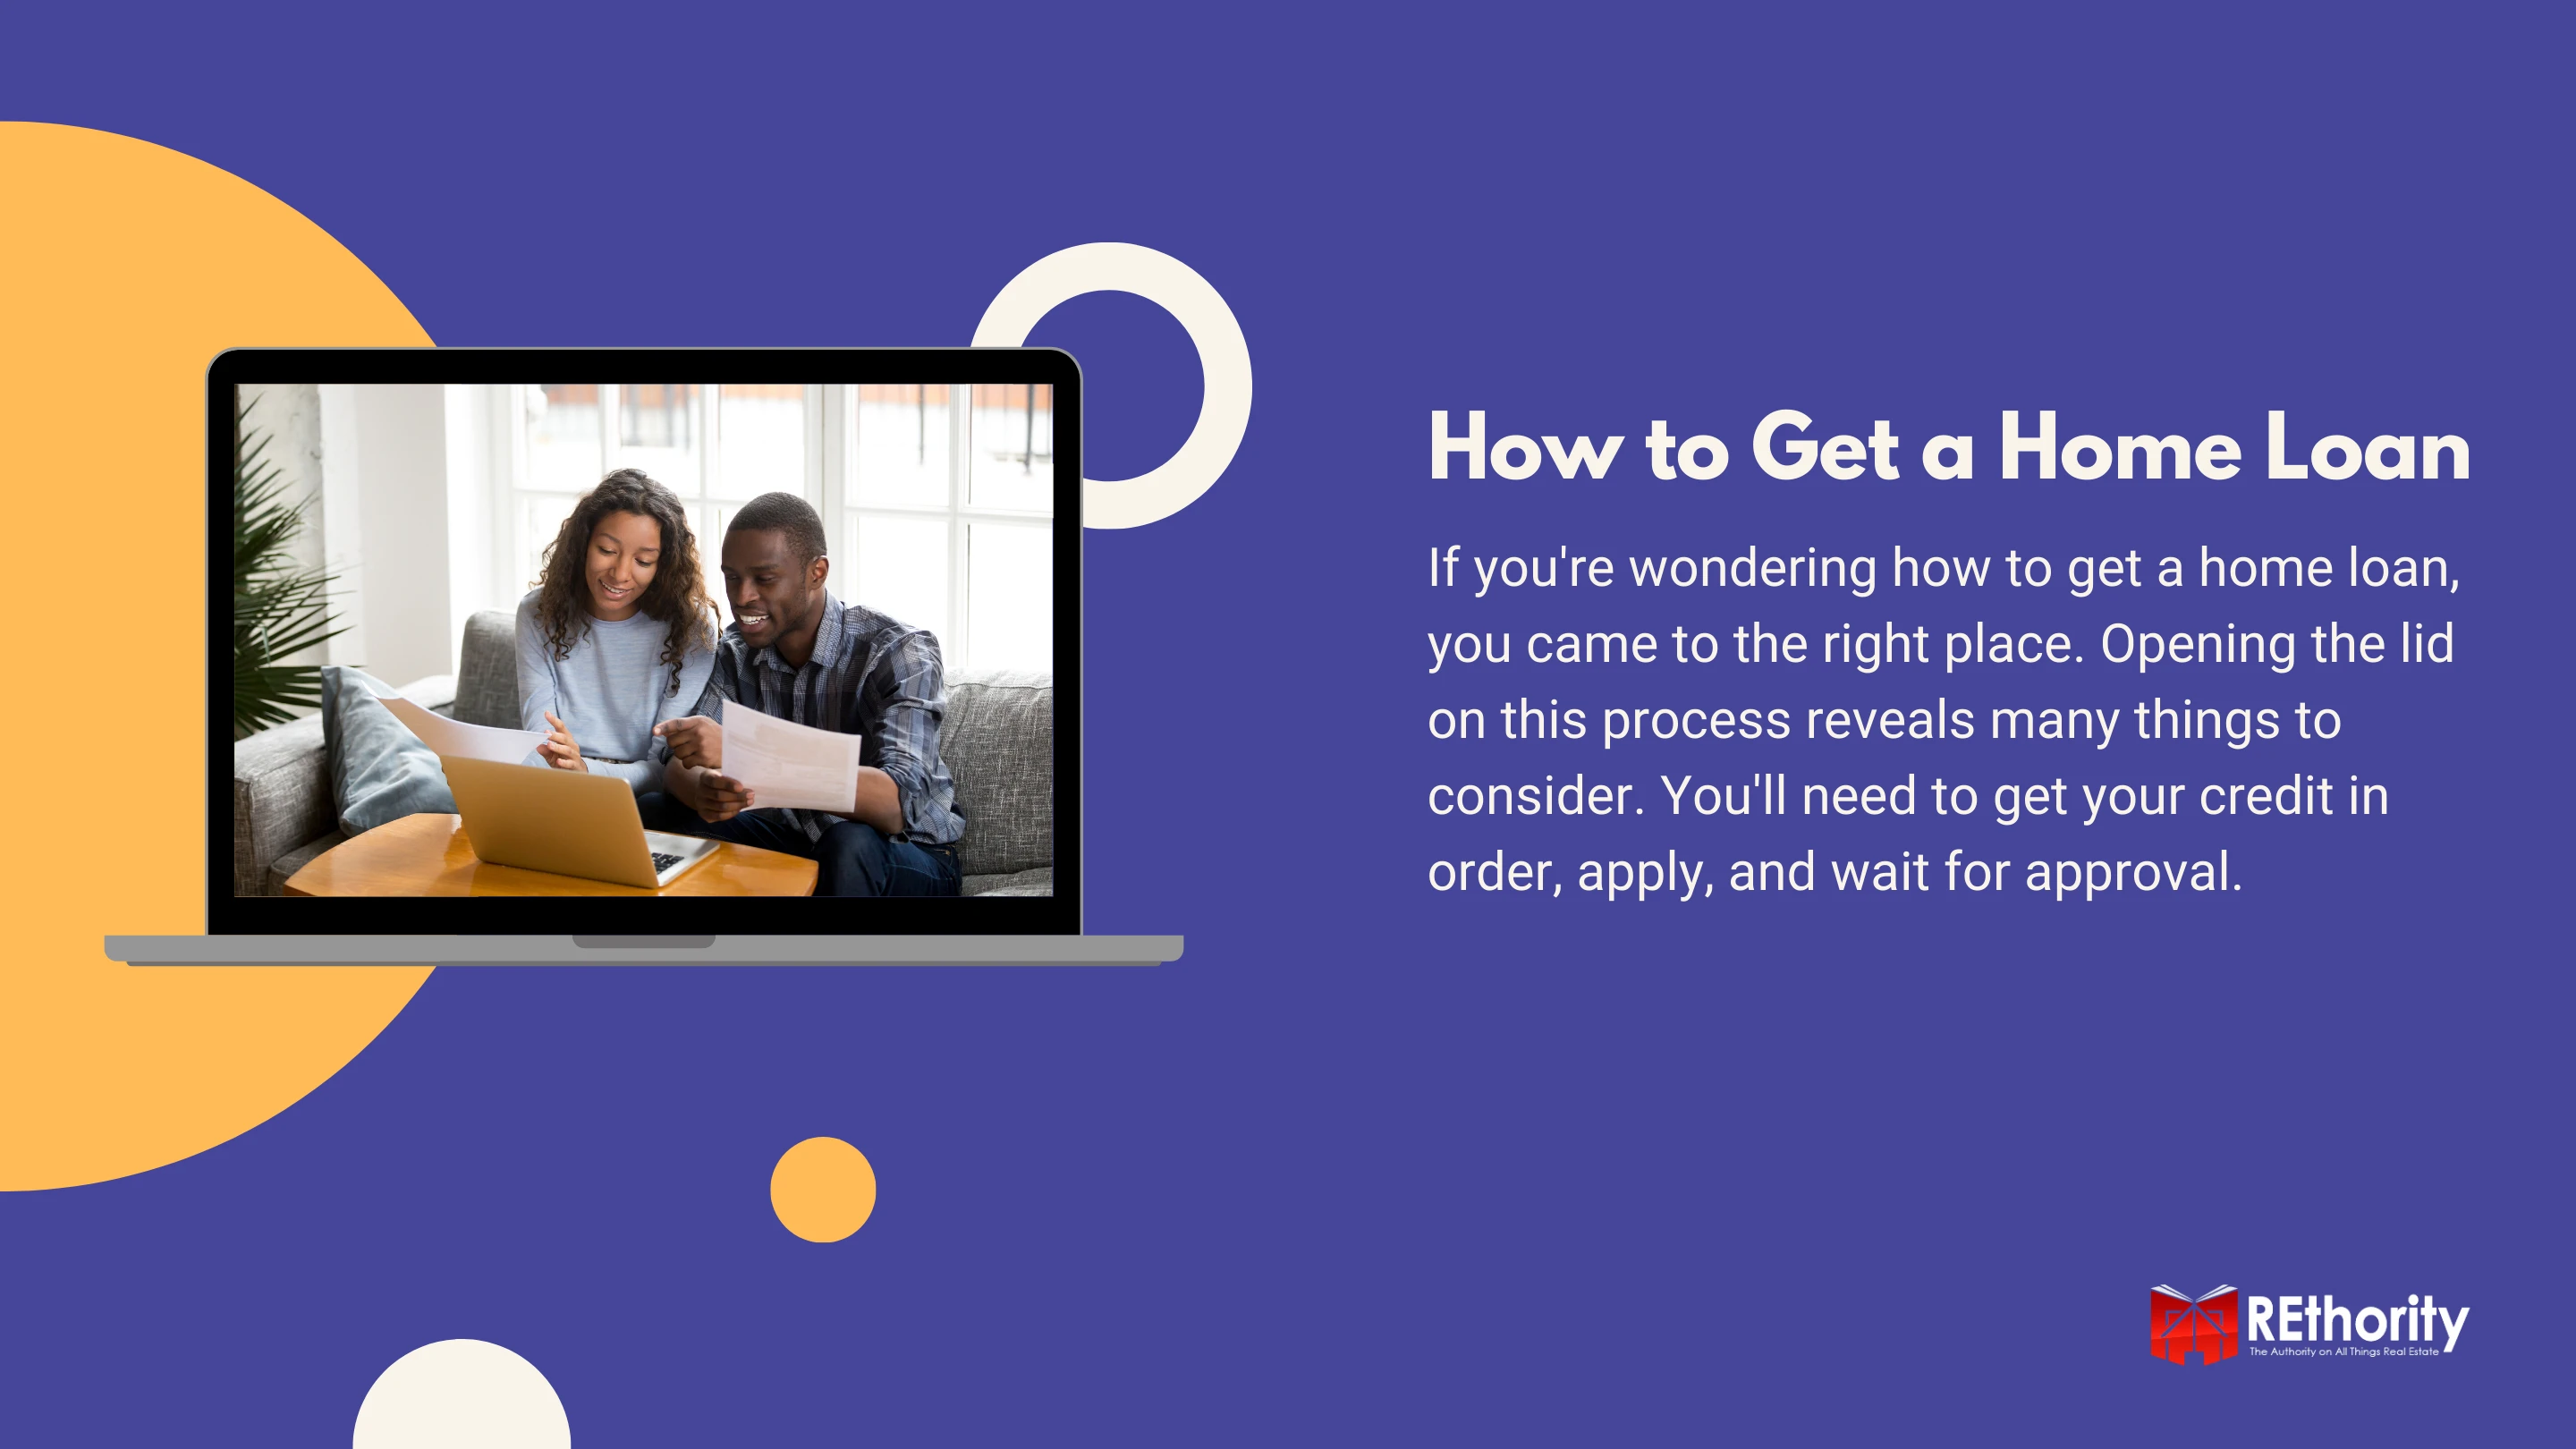 How to Get a Home Loan graphic featuring two buyers looking at documents and a brief explanation about the article contents